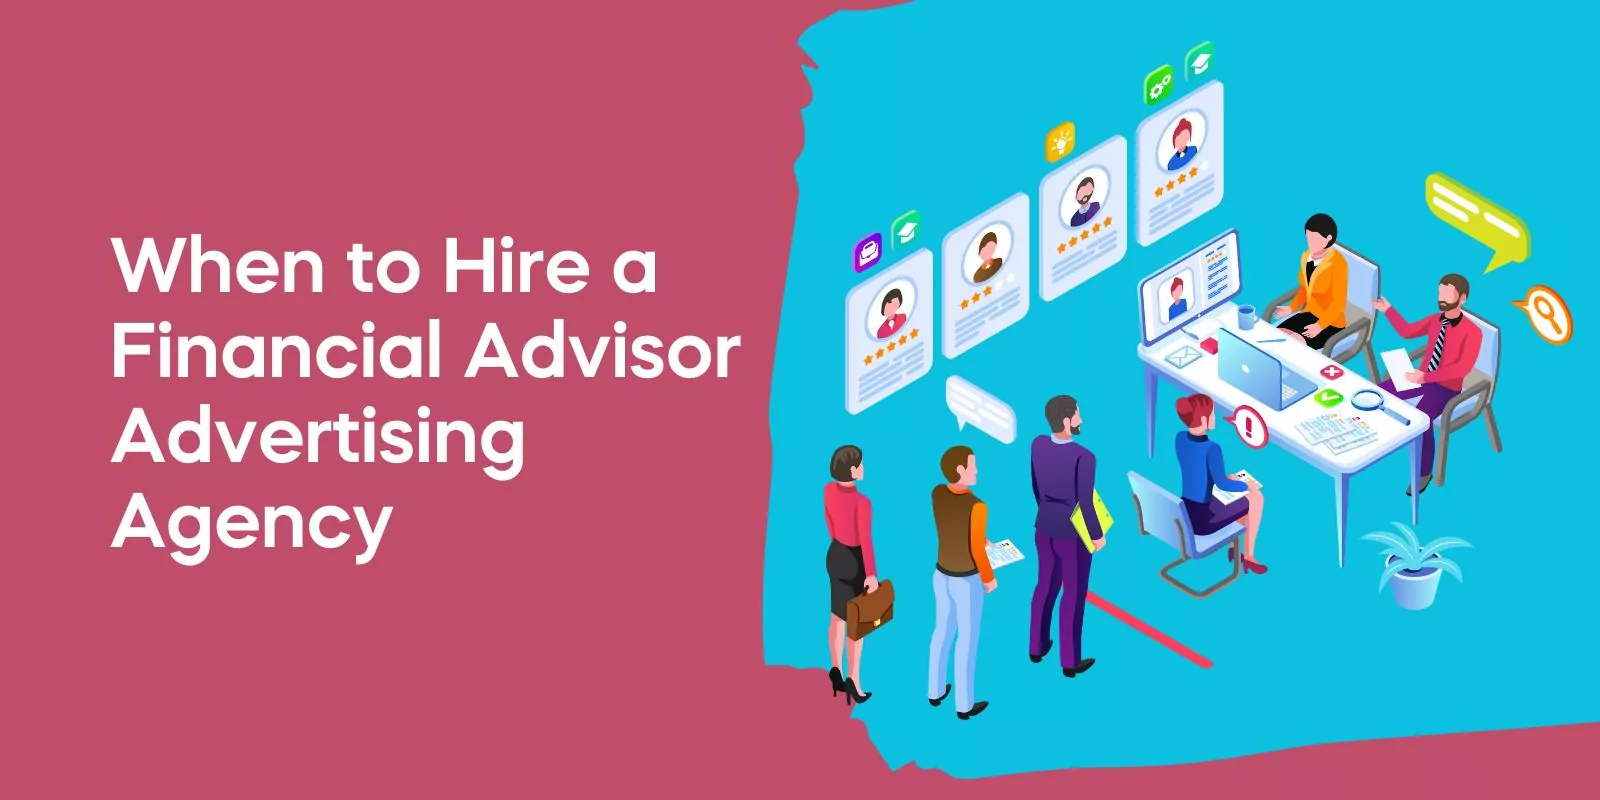 When to Hire a Financial Advisor Advertising Agency